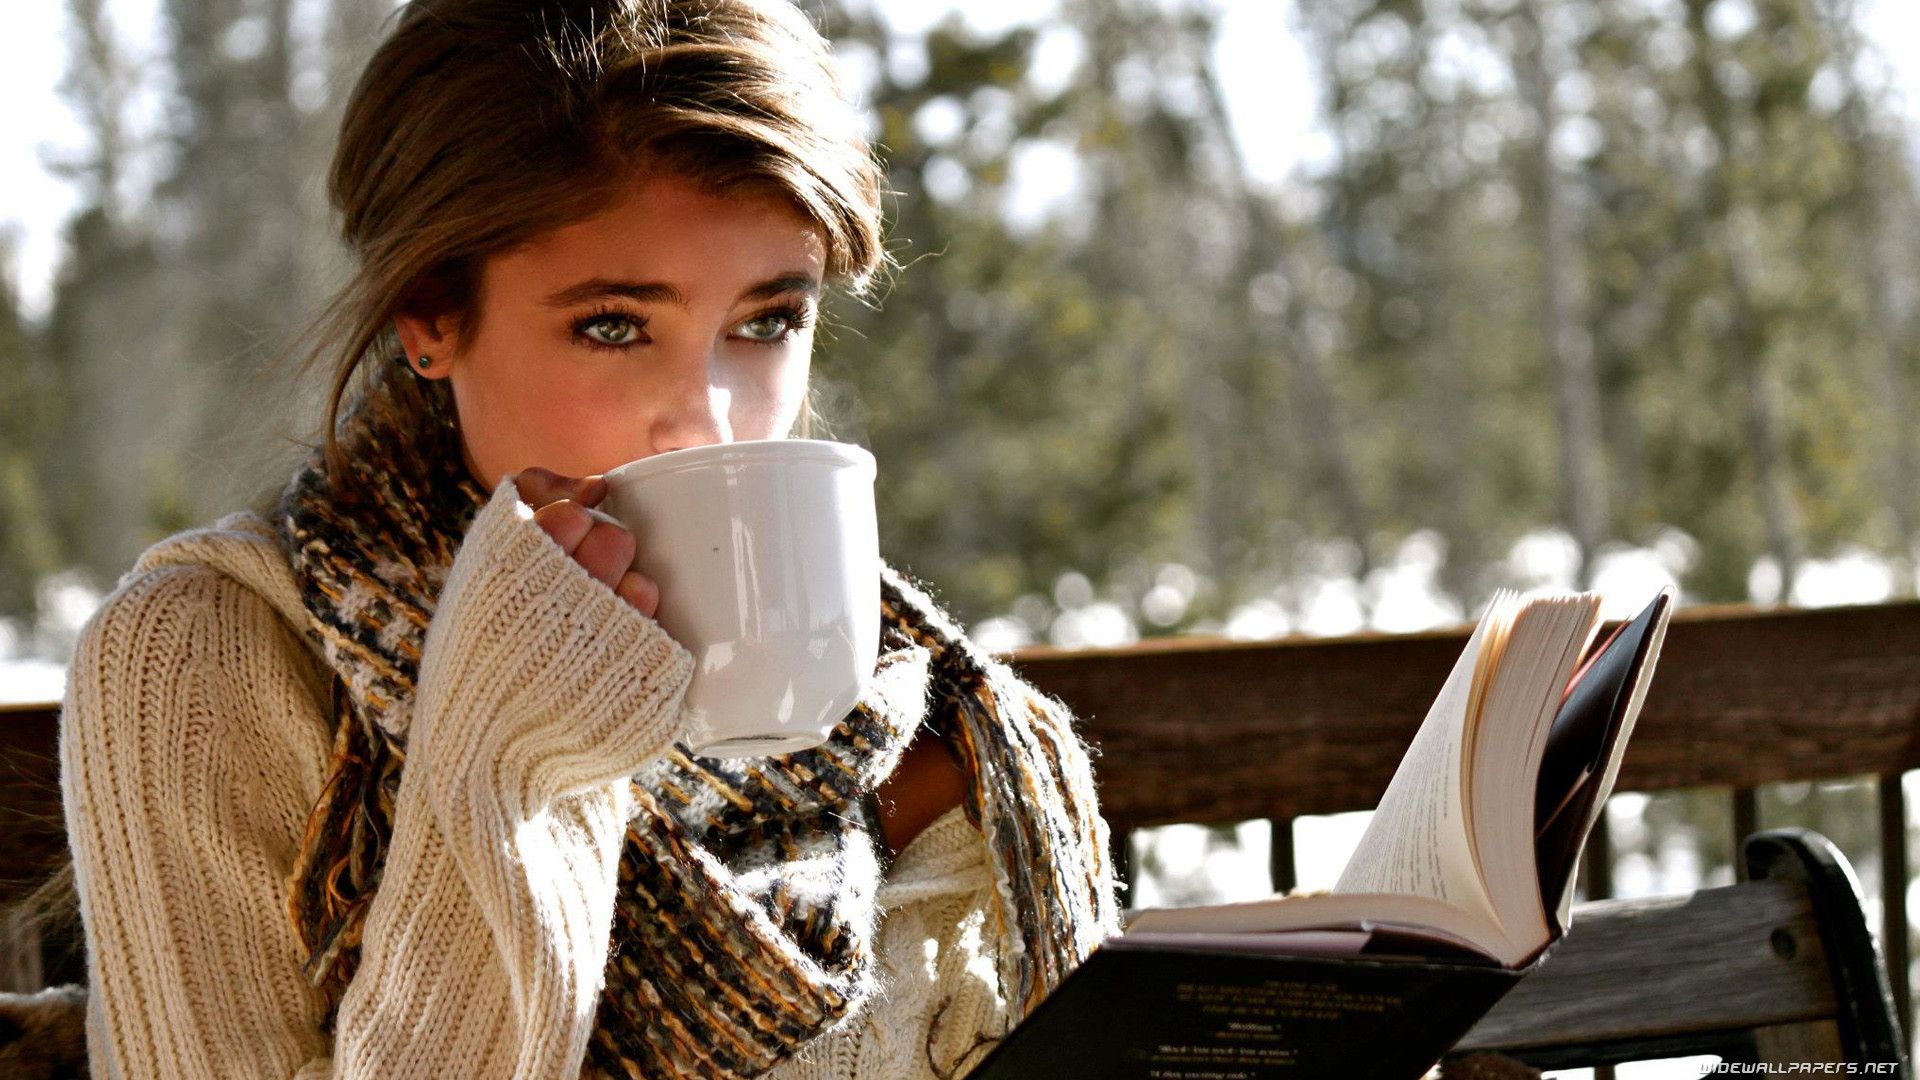 Wallpaper, women outdoors, model, winter, books, fashion, cup, spring, Person, Taylor Marie Hill, beauty, season, human action 1920x1080